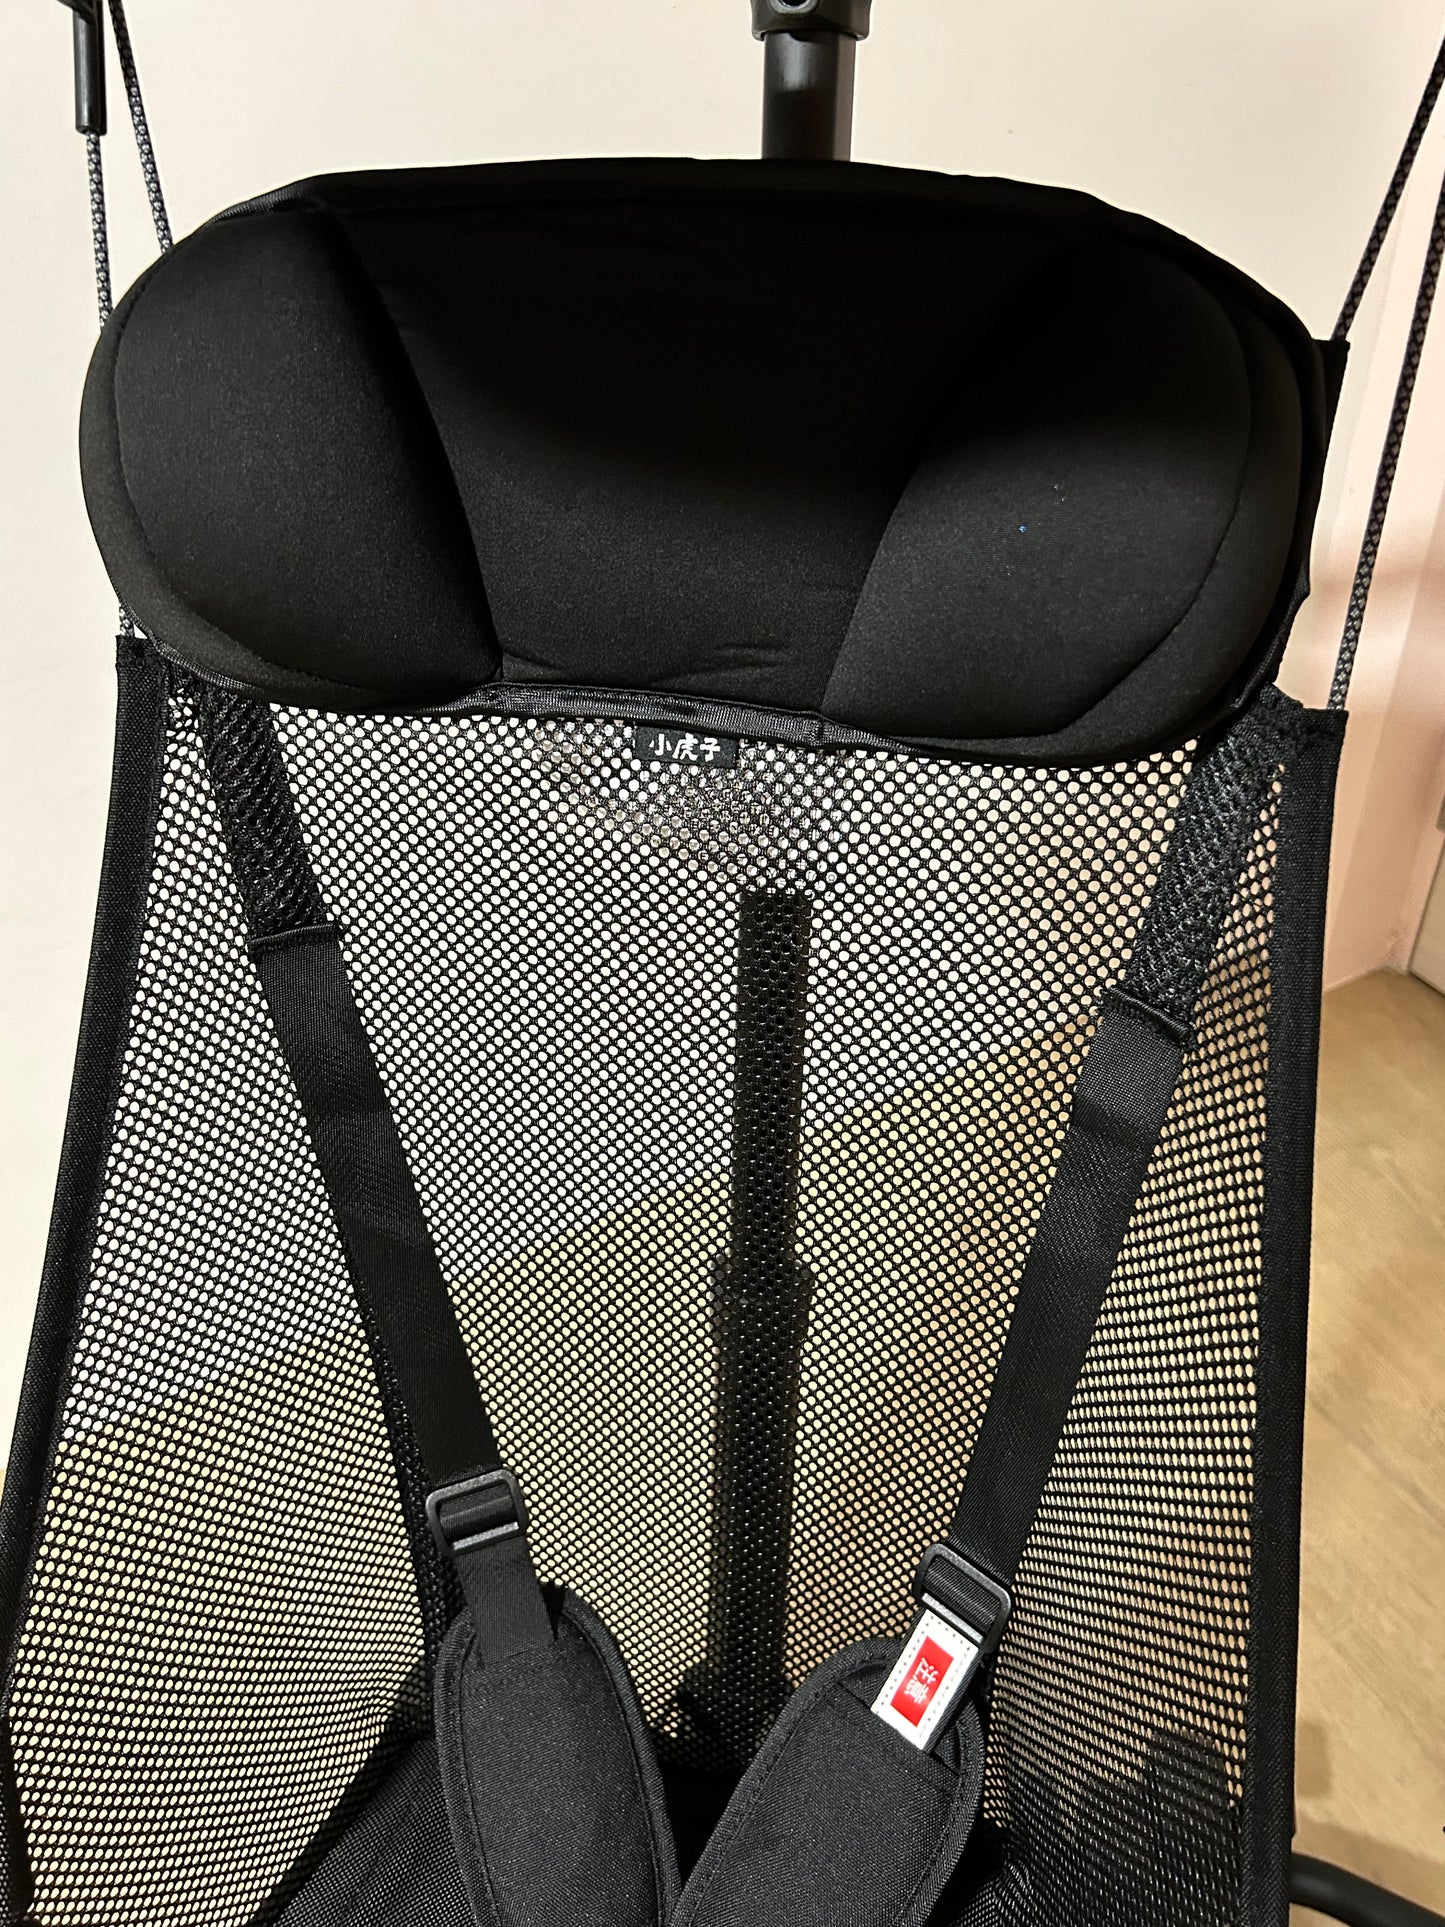 Little Tiger Super Compact Stroller (convertible into Twins stroller with connector)